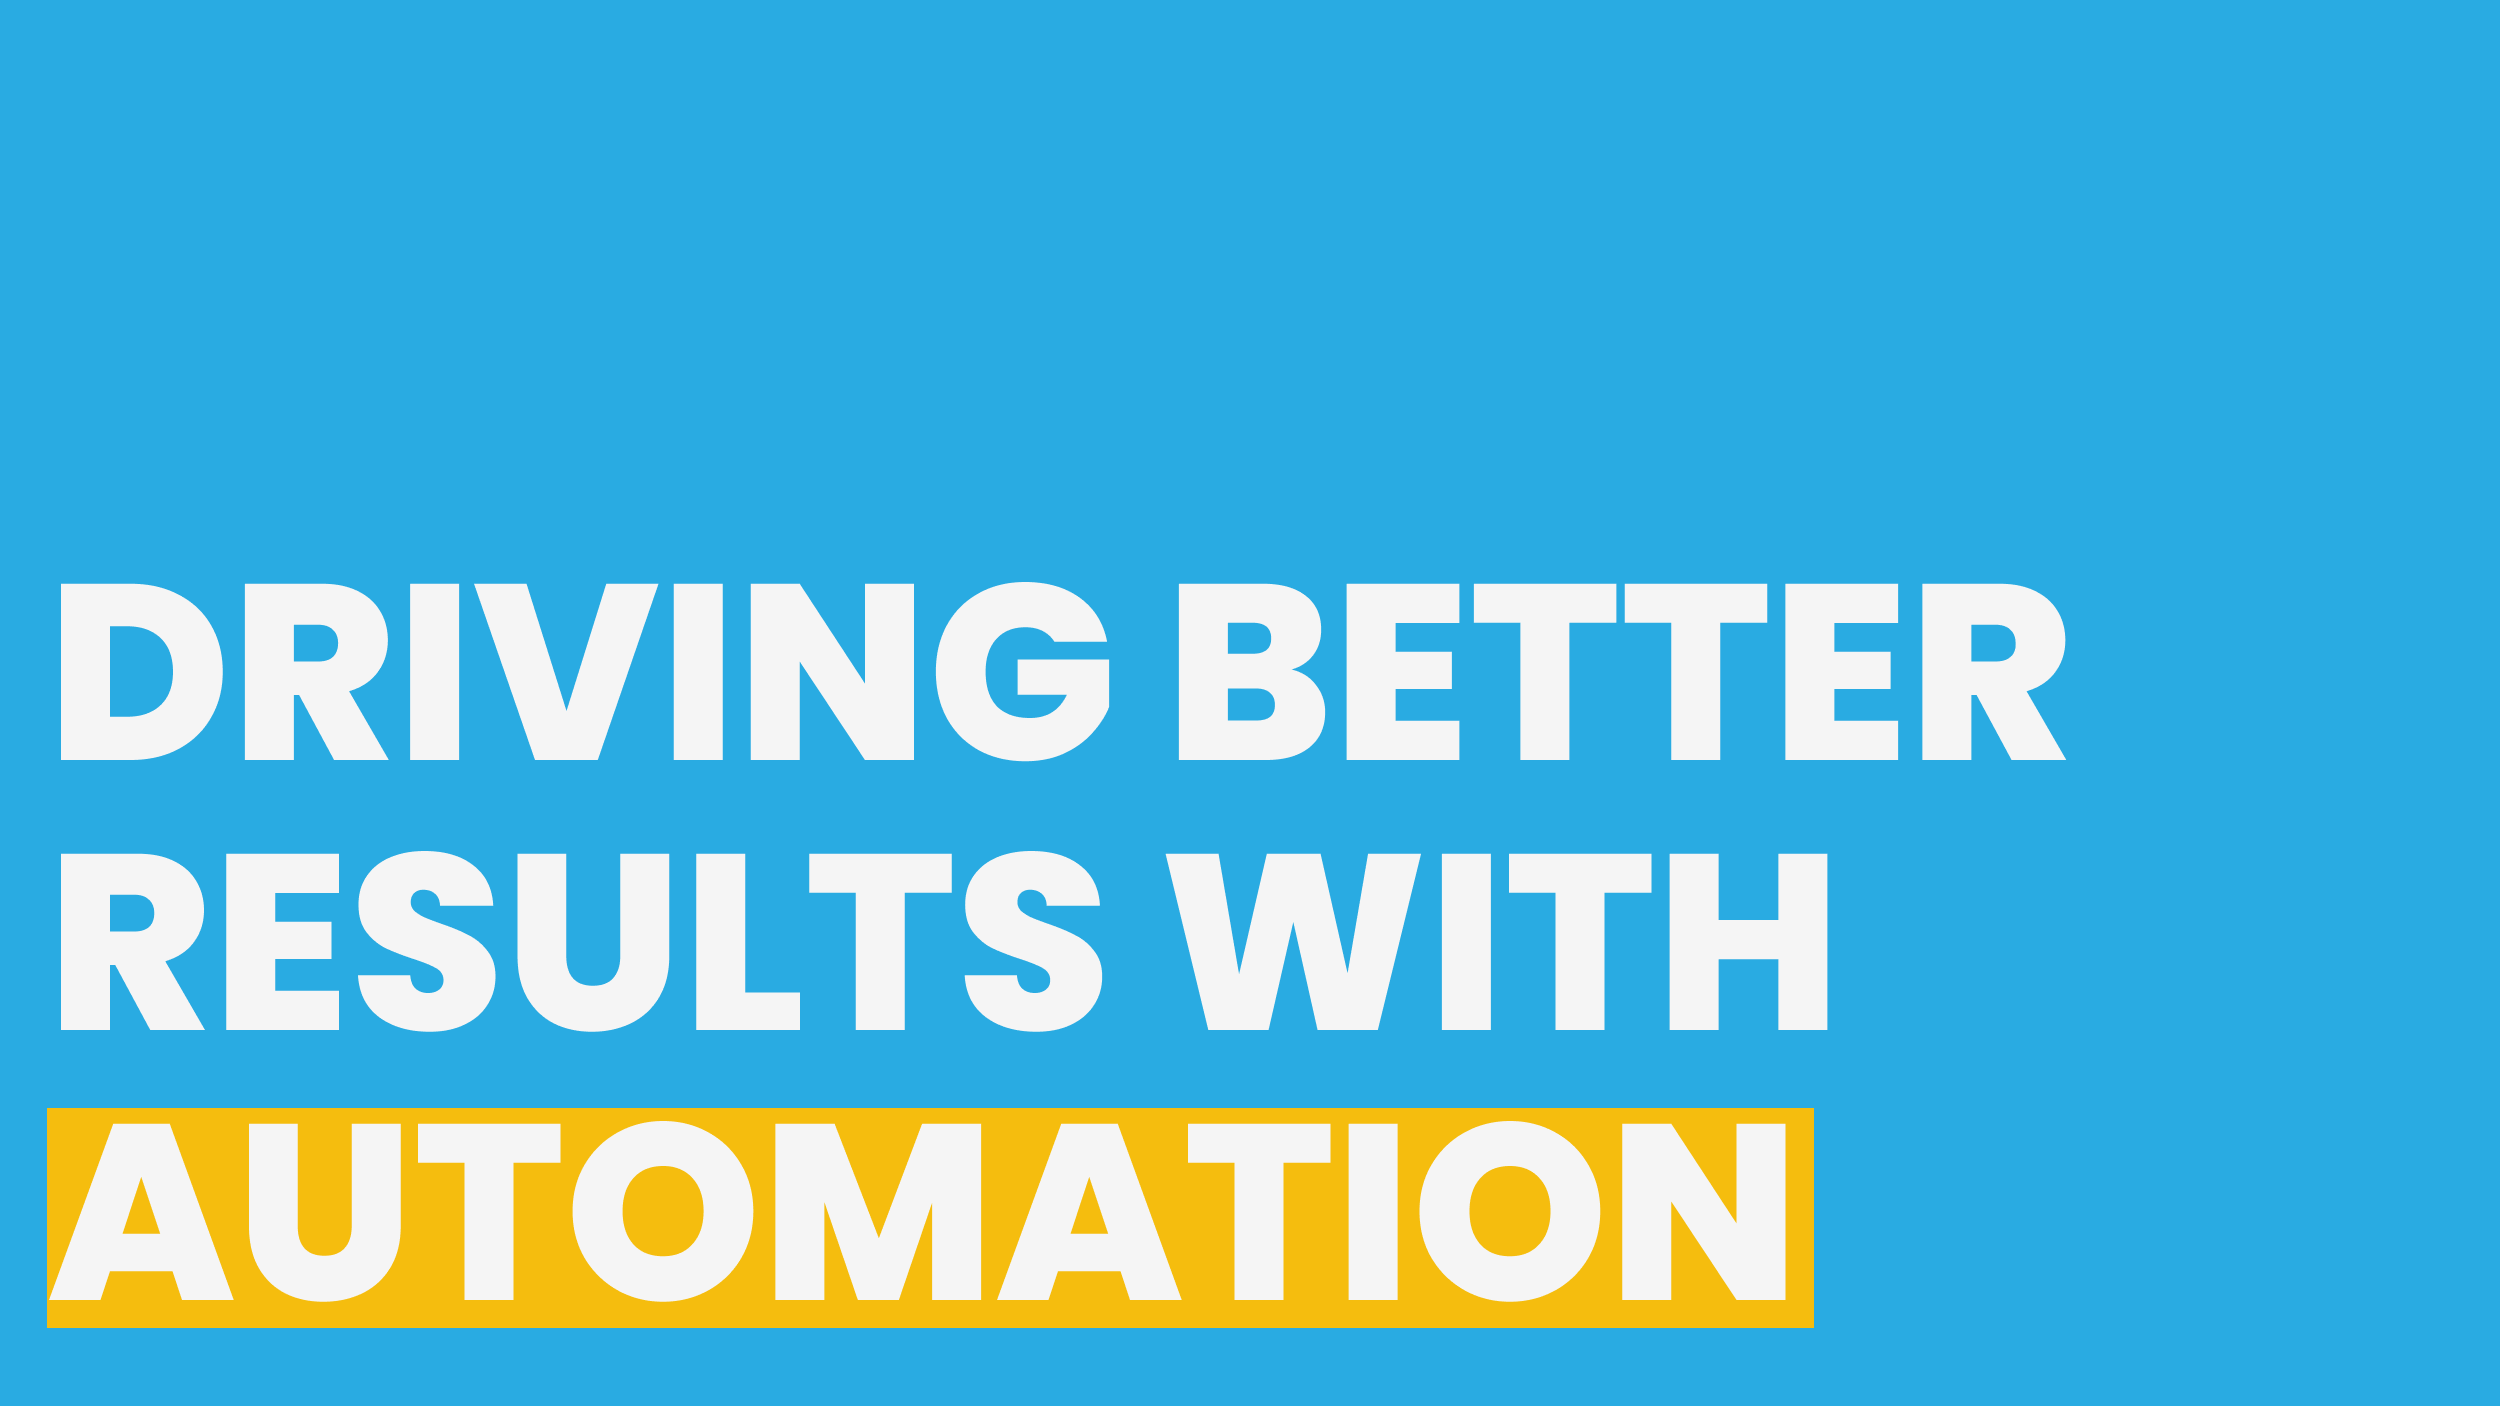 DRIVING BETTER RESULTS WITH AUTOMATION